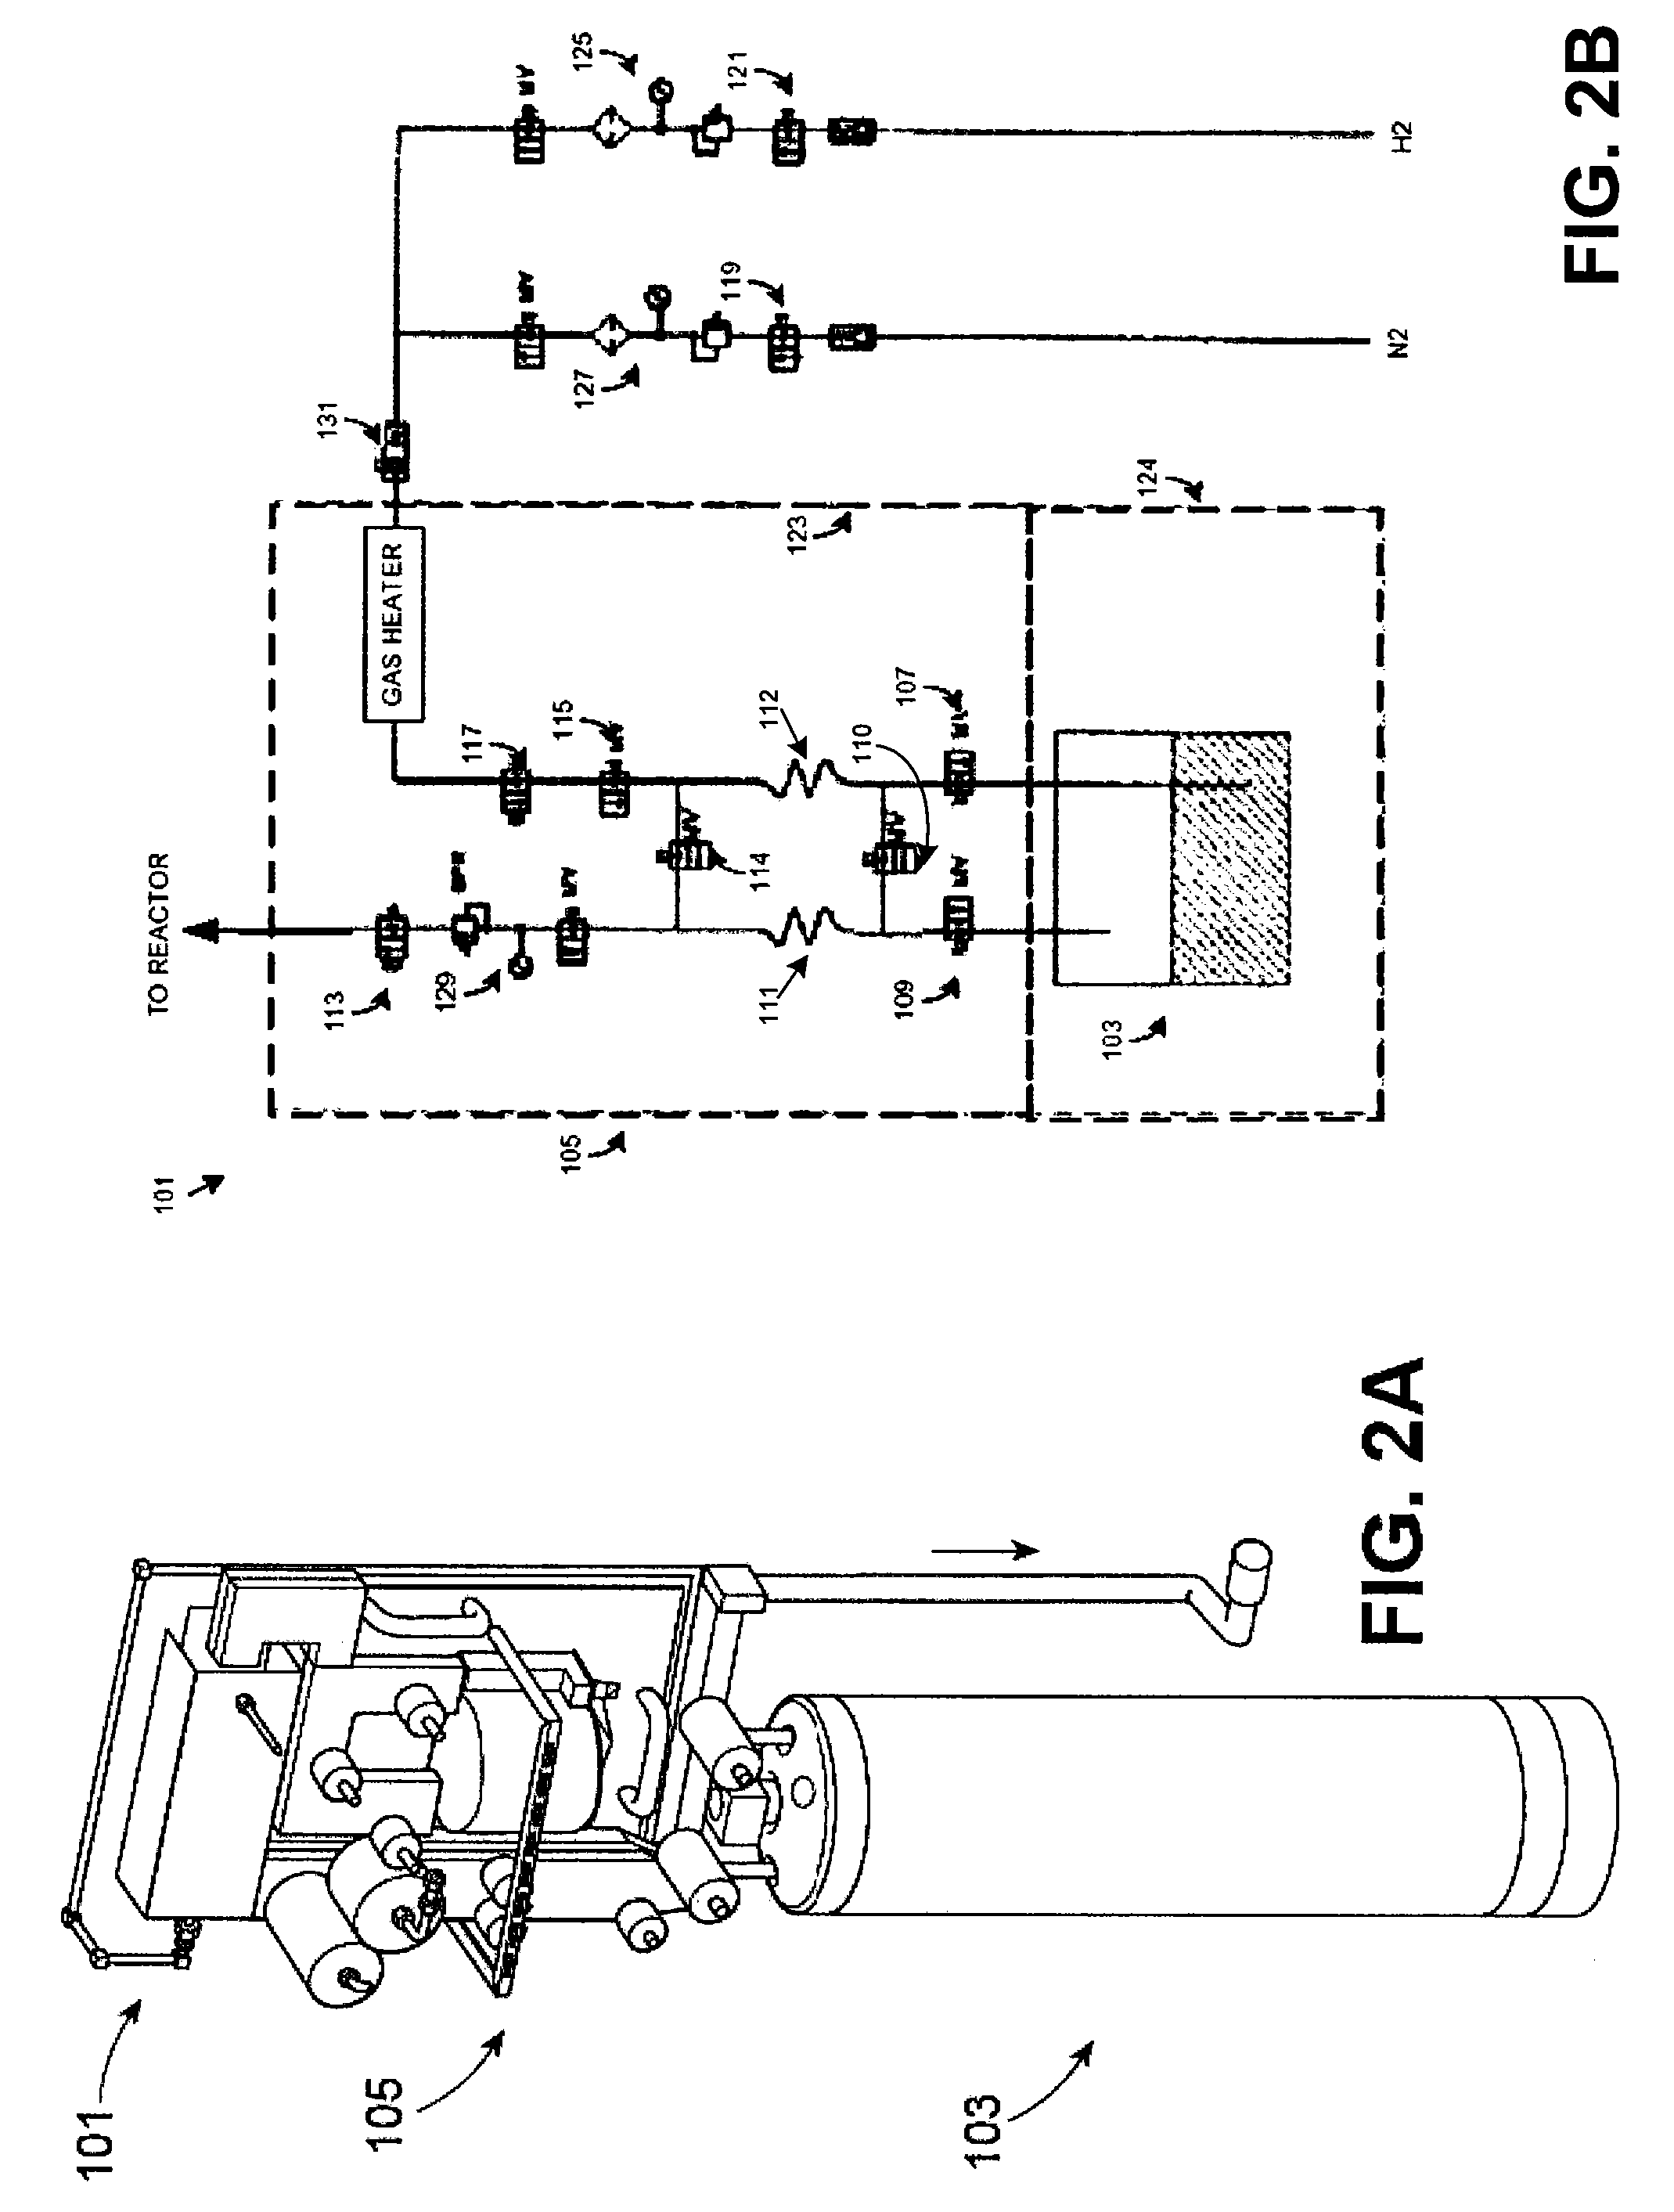 Temperature-controlled purge gate valve for chemical vapor deposition chamber